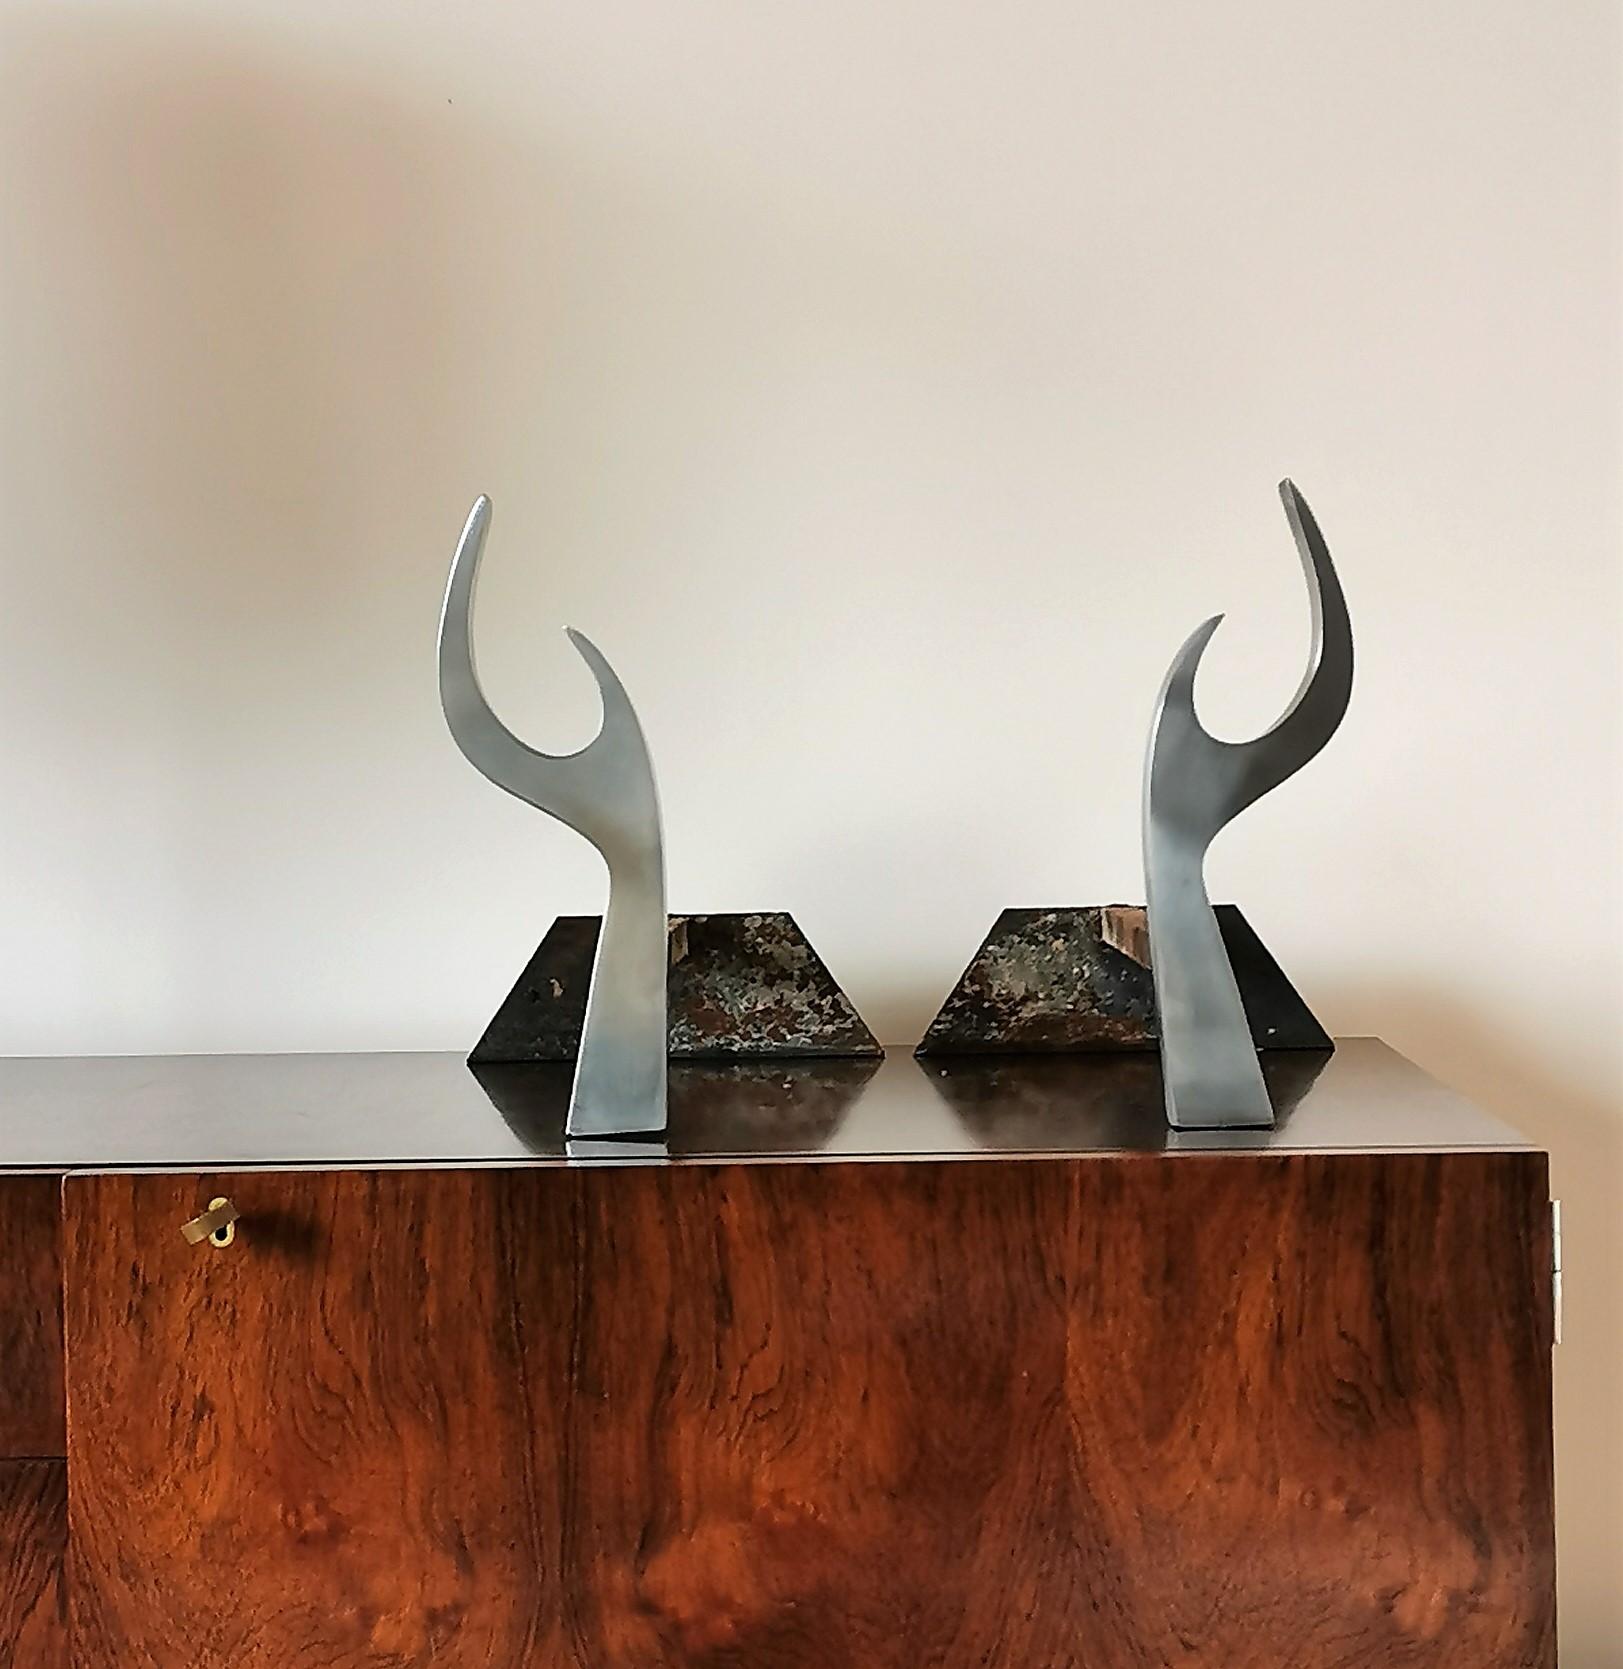 Plated Jean-Paul Créations Brutalist Stainless Steel Andirons, France, 1970s For Sale